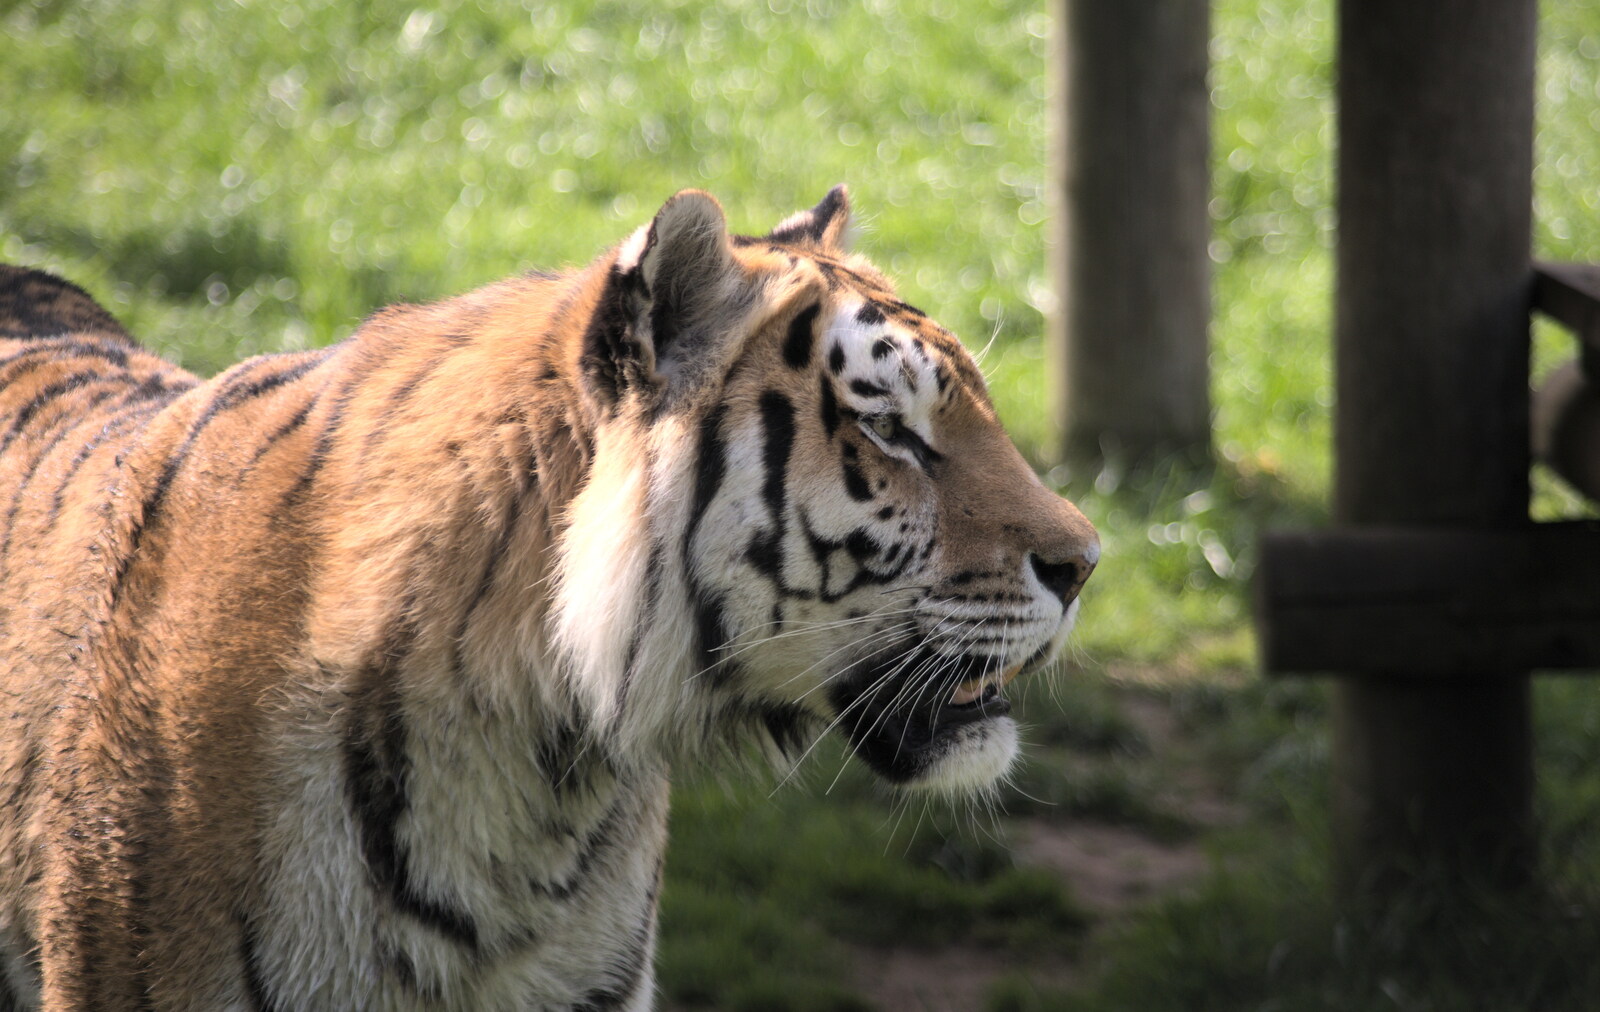 The tiger comes up close to the window from A Moth Infestation and a Trip to the Zoo, Banham, Norfolk - 21st May 2022